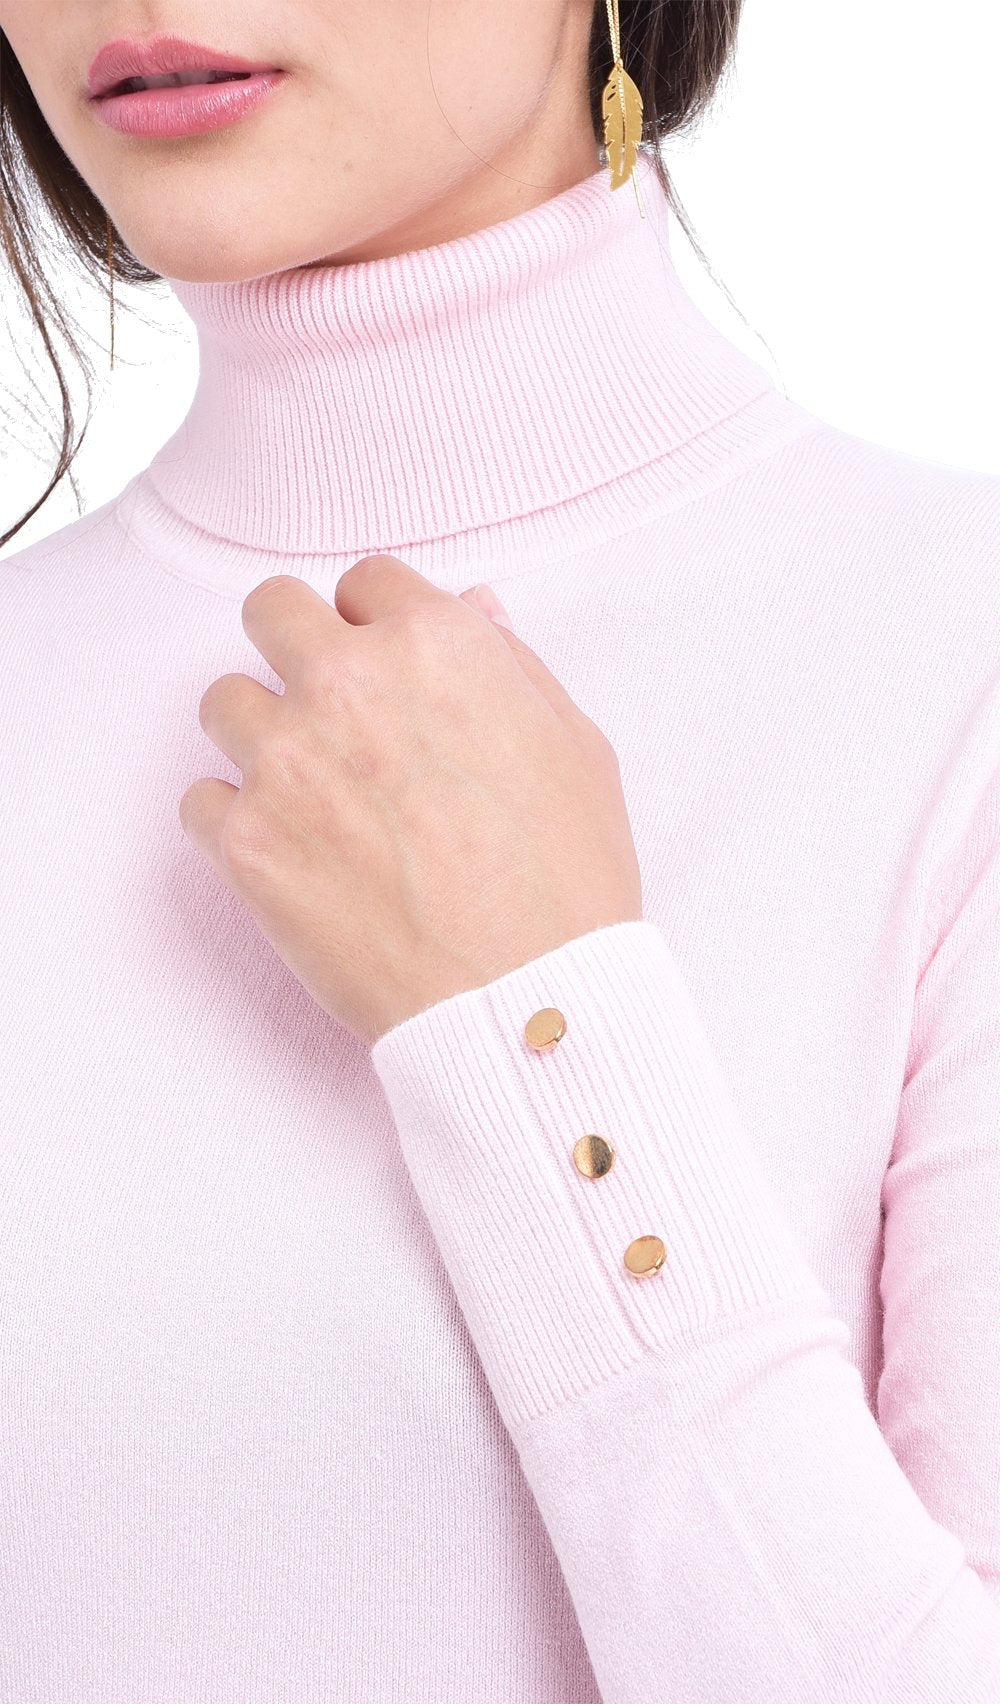 TURTLENECK SWEATER WITH BUTTONS ON SLEEVES